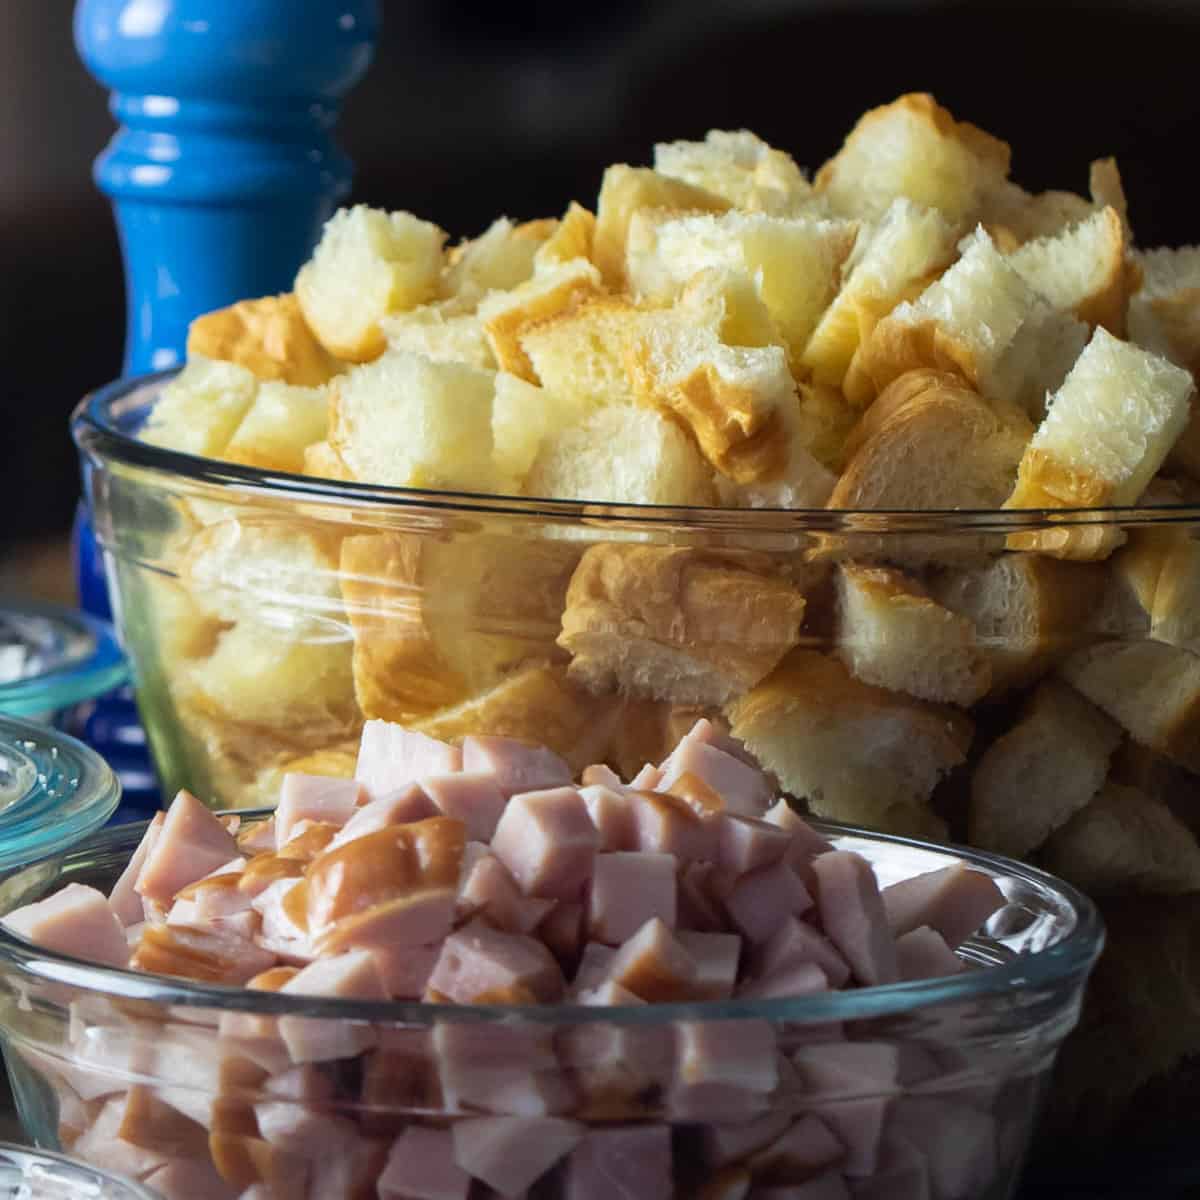 Cubed croissants and ham in glass mixing bowls.